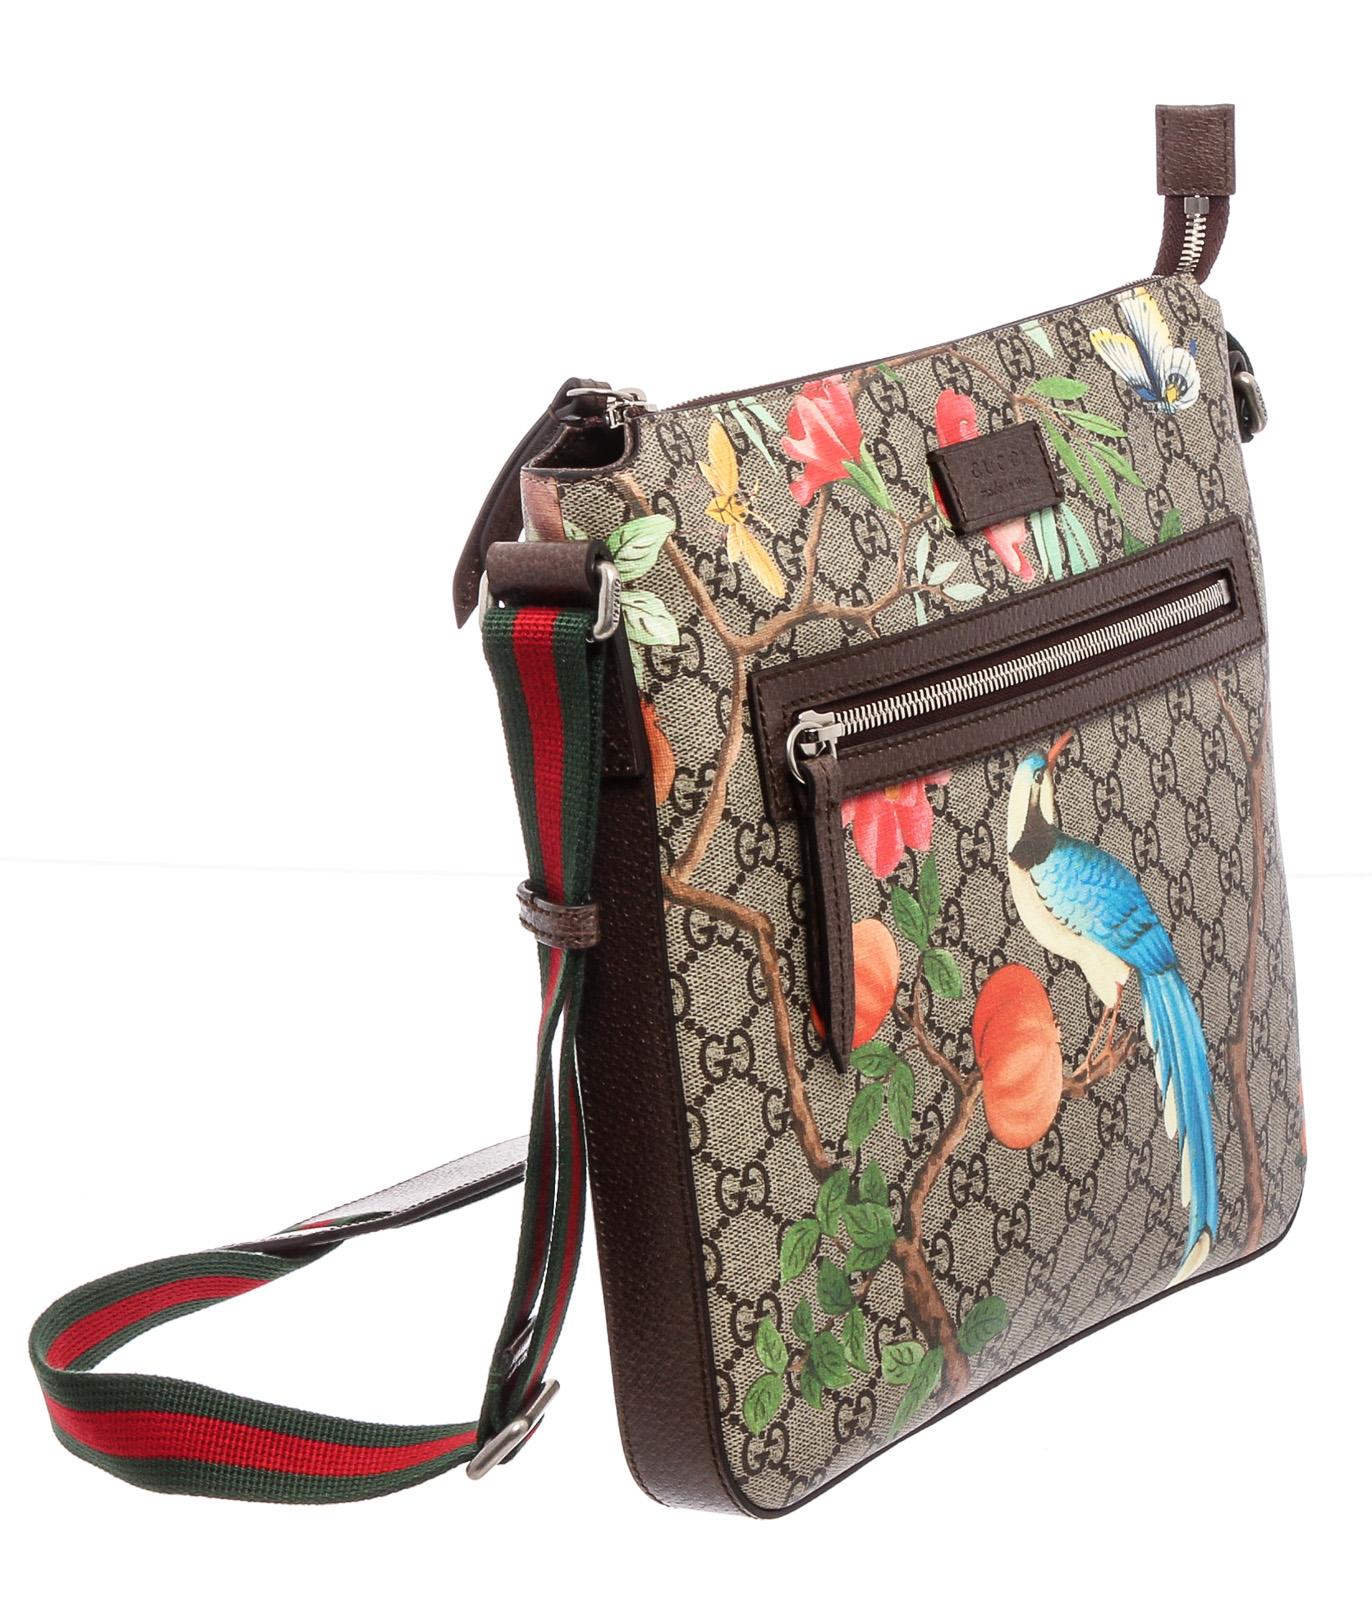 Beige and multicolor GG Supreme Tian coated canvas Gucci messenger bag with silver-tone hardware, single red and green Web flat shoulder strap with shoulder guard, brown leather trim, single zip pocket and embossed logo at front face, light brown